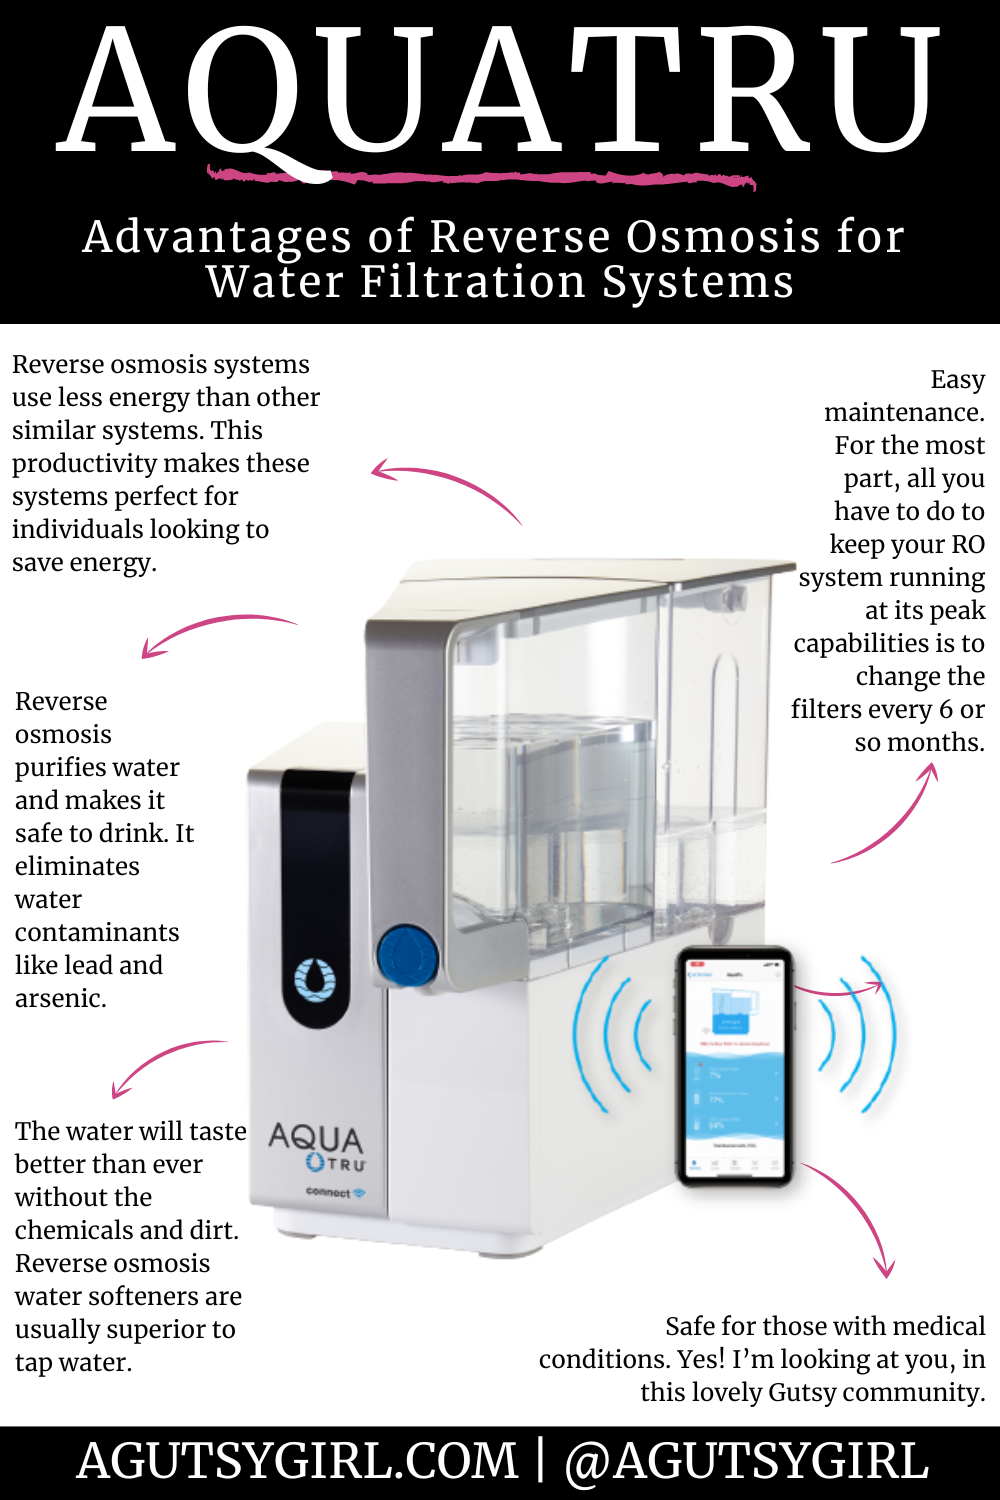 AquaTru – Countertop Water Filtration Purification System with Exclusive  4-Stage Ultra Reverse Osmosis Technology (No Plumbing or Installation  Required)